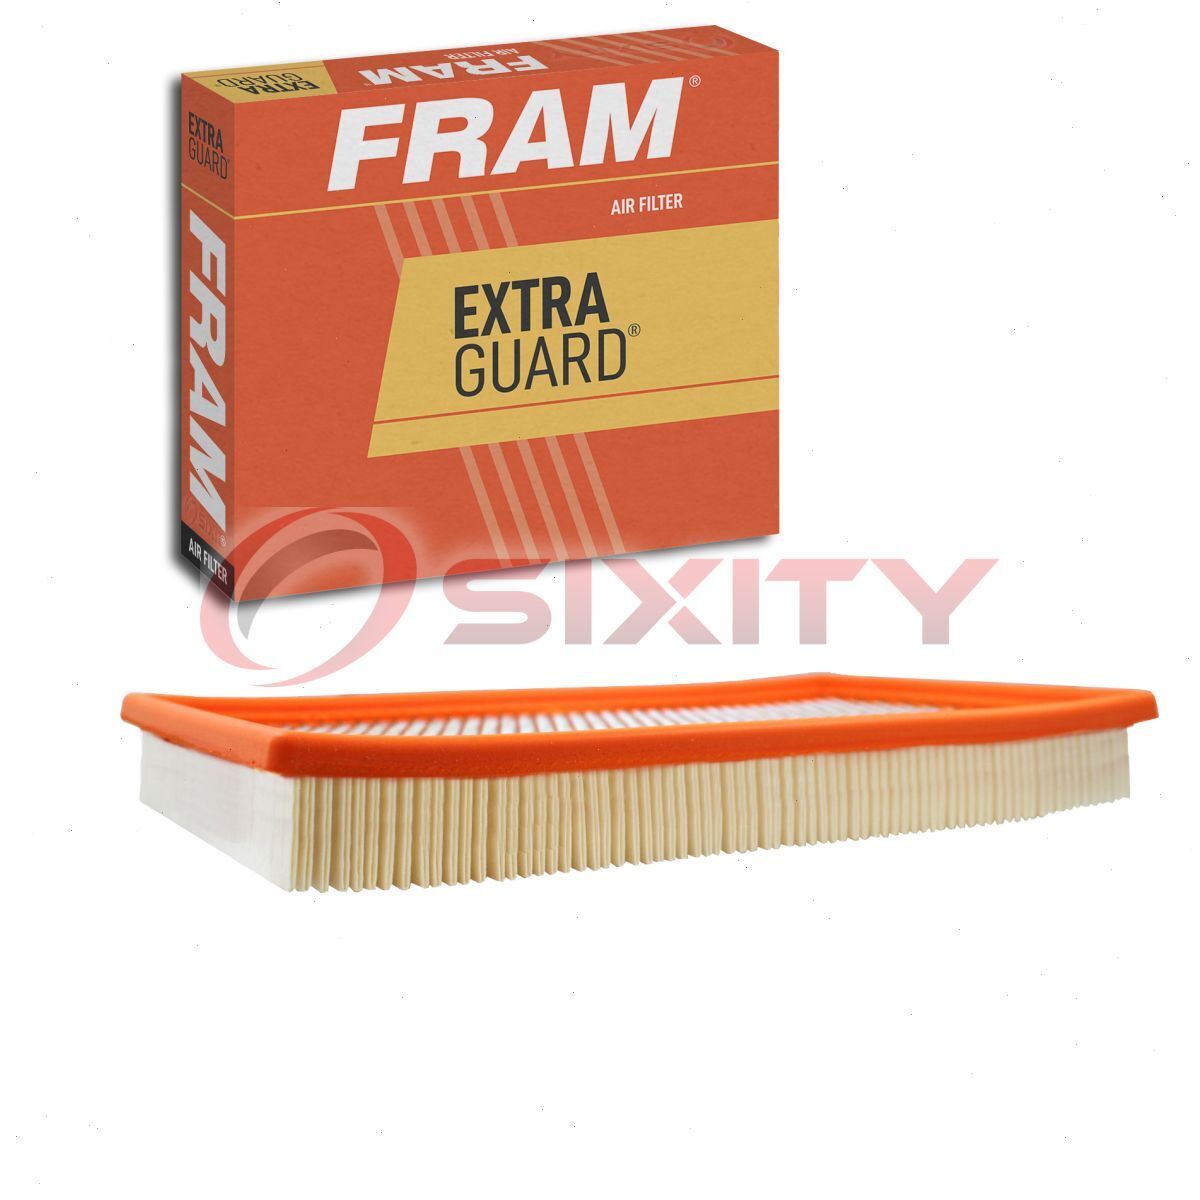 FRAM Extra Guard Air Filter for 1990-1992 Nissan Stanza Intake Inlet aw